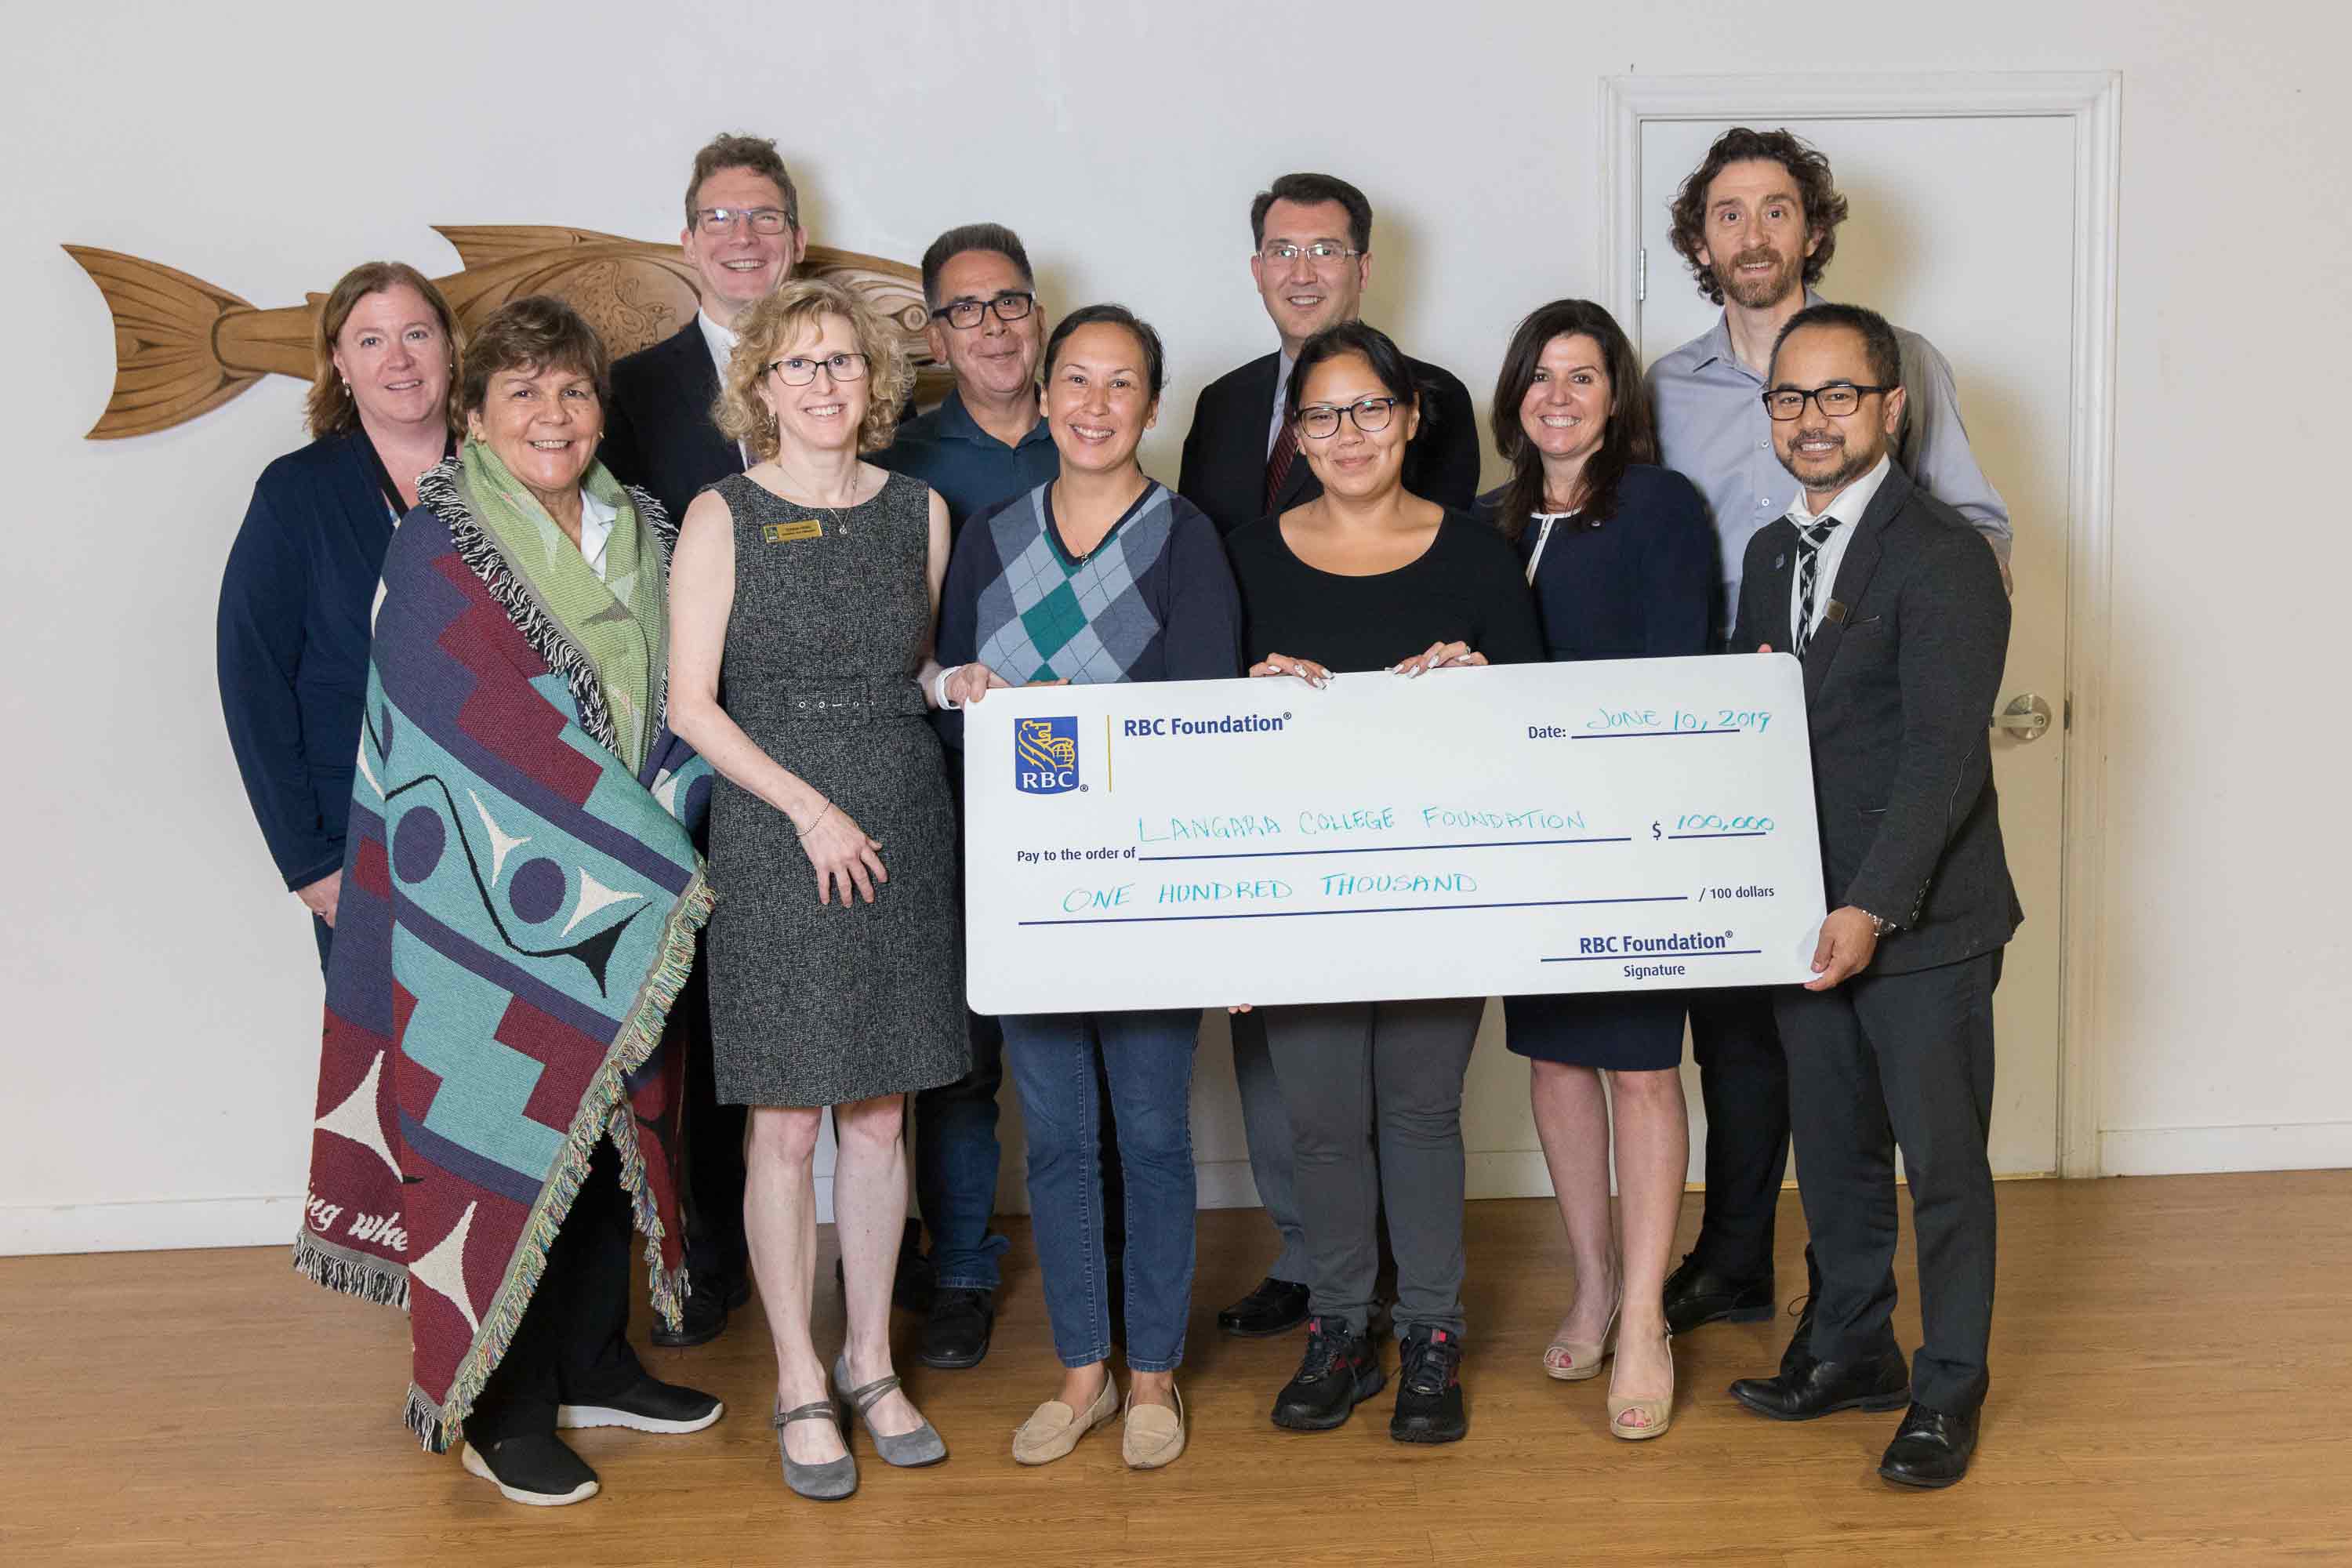 Group of people posing holding a cheque